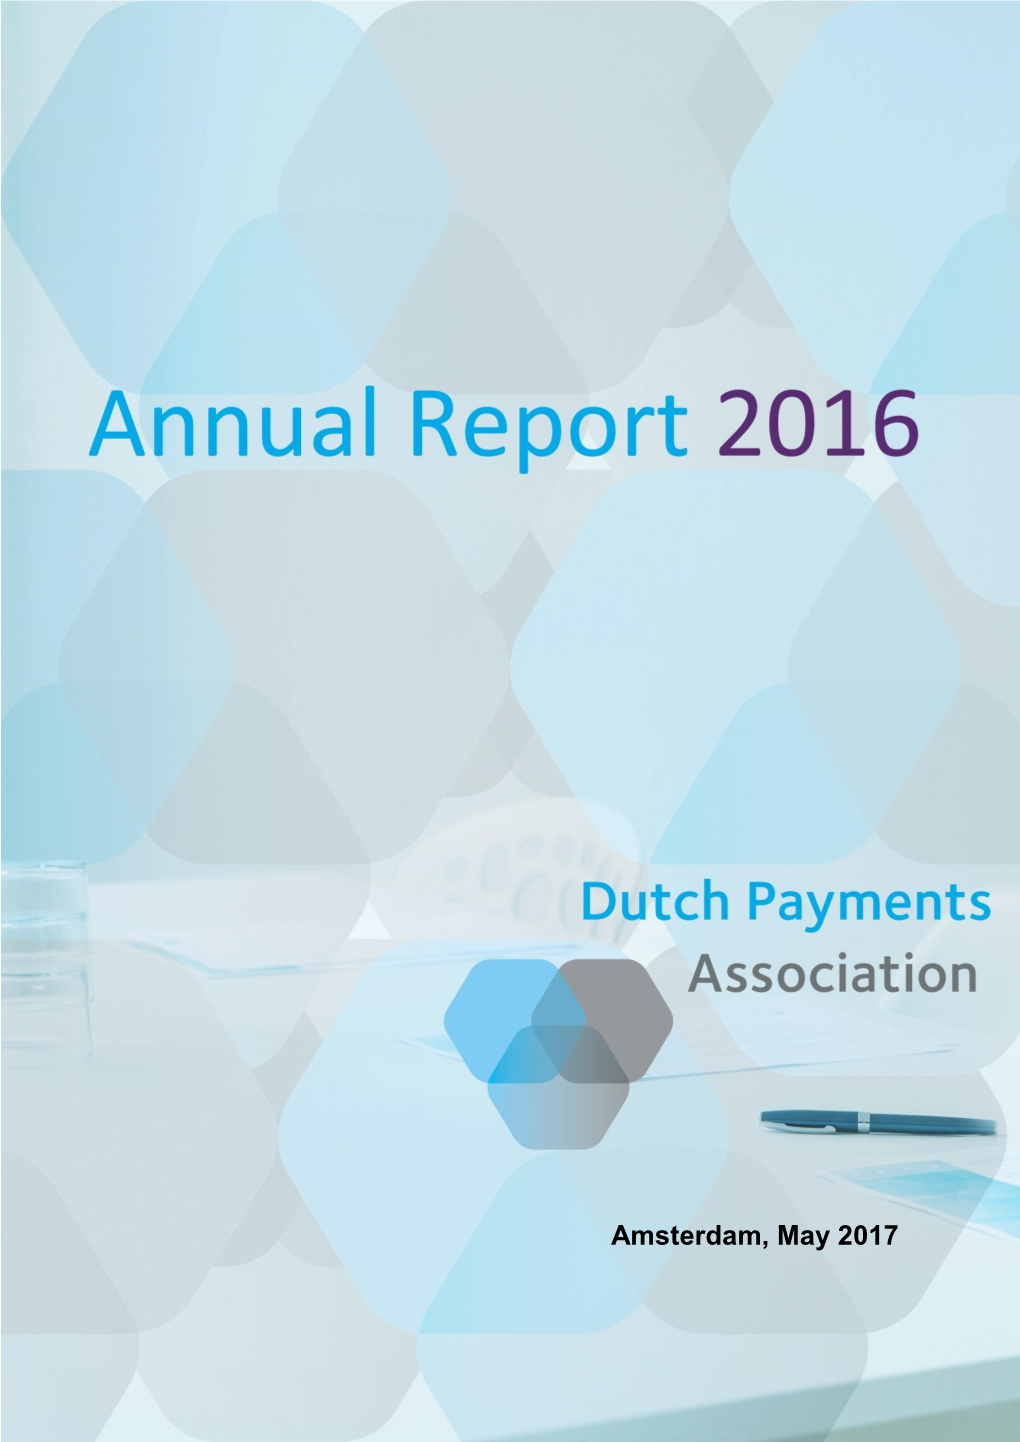 Annual Report for 2016 of the Dutch Payments Association